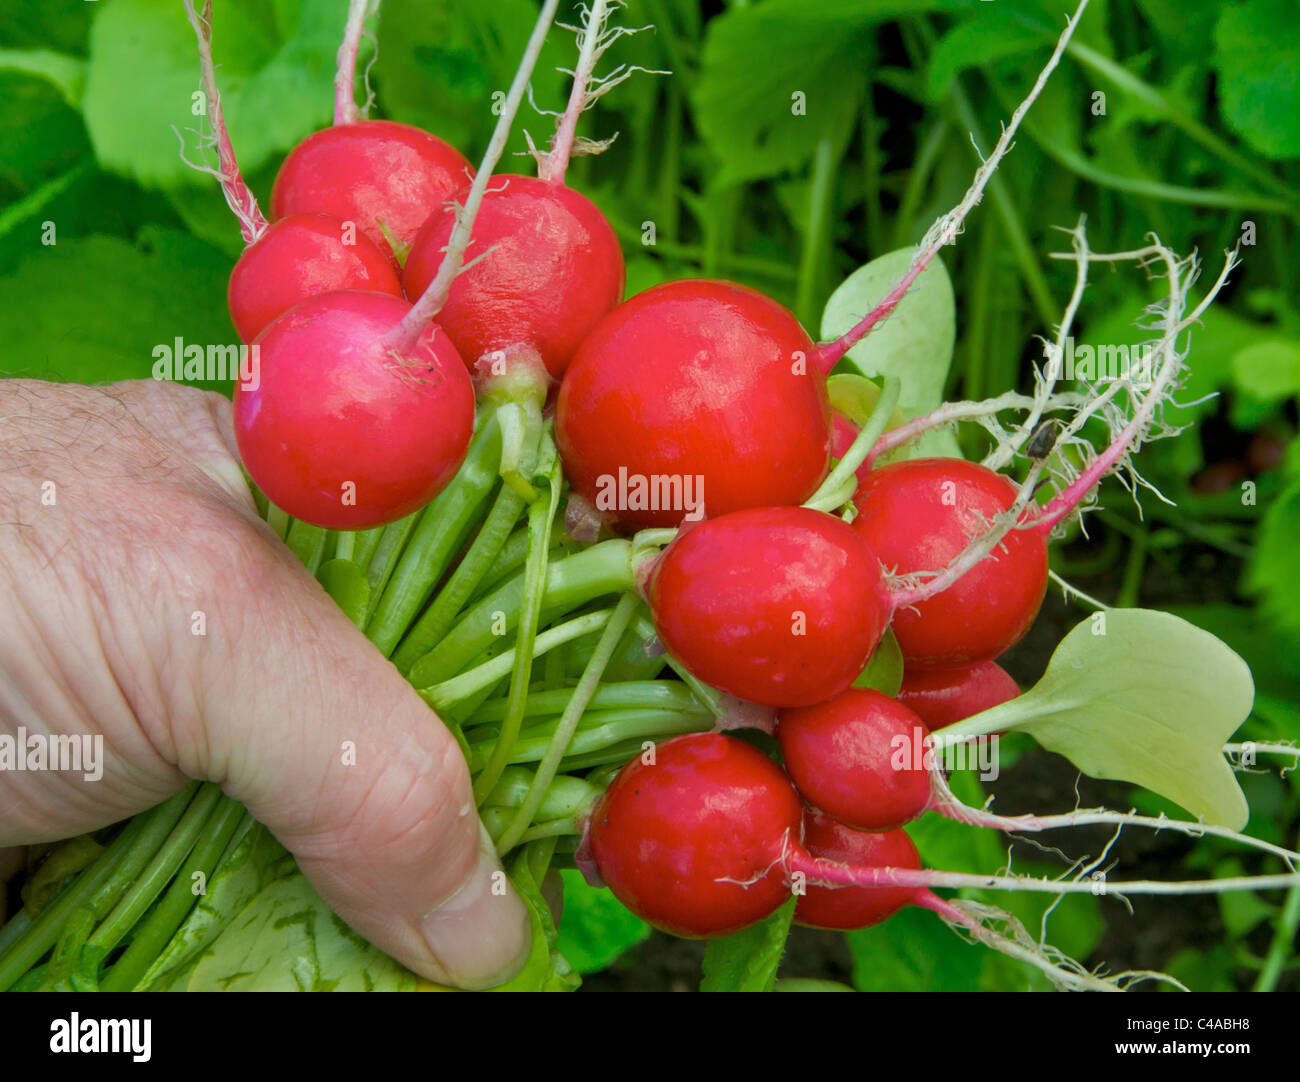 Summer salad vegetables - radishes are a colorful colourful addition. Stock Photo